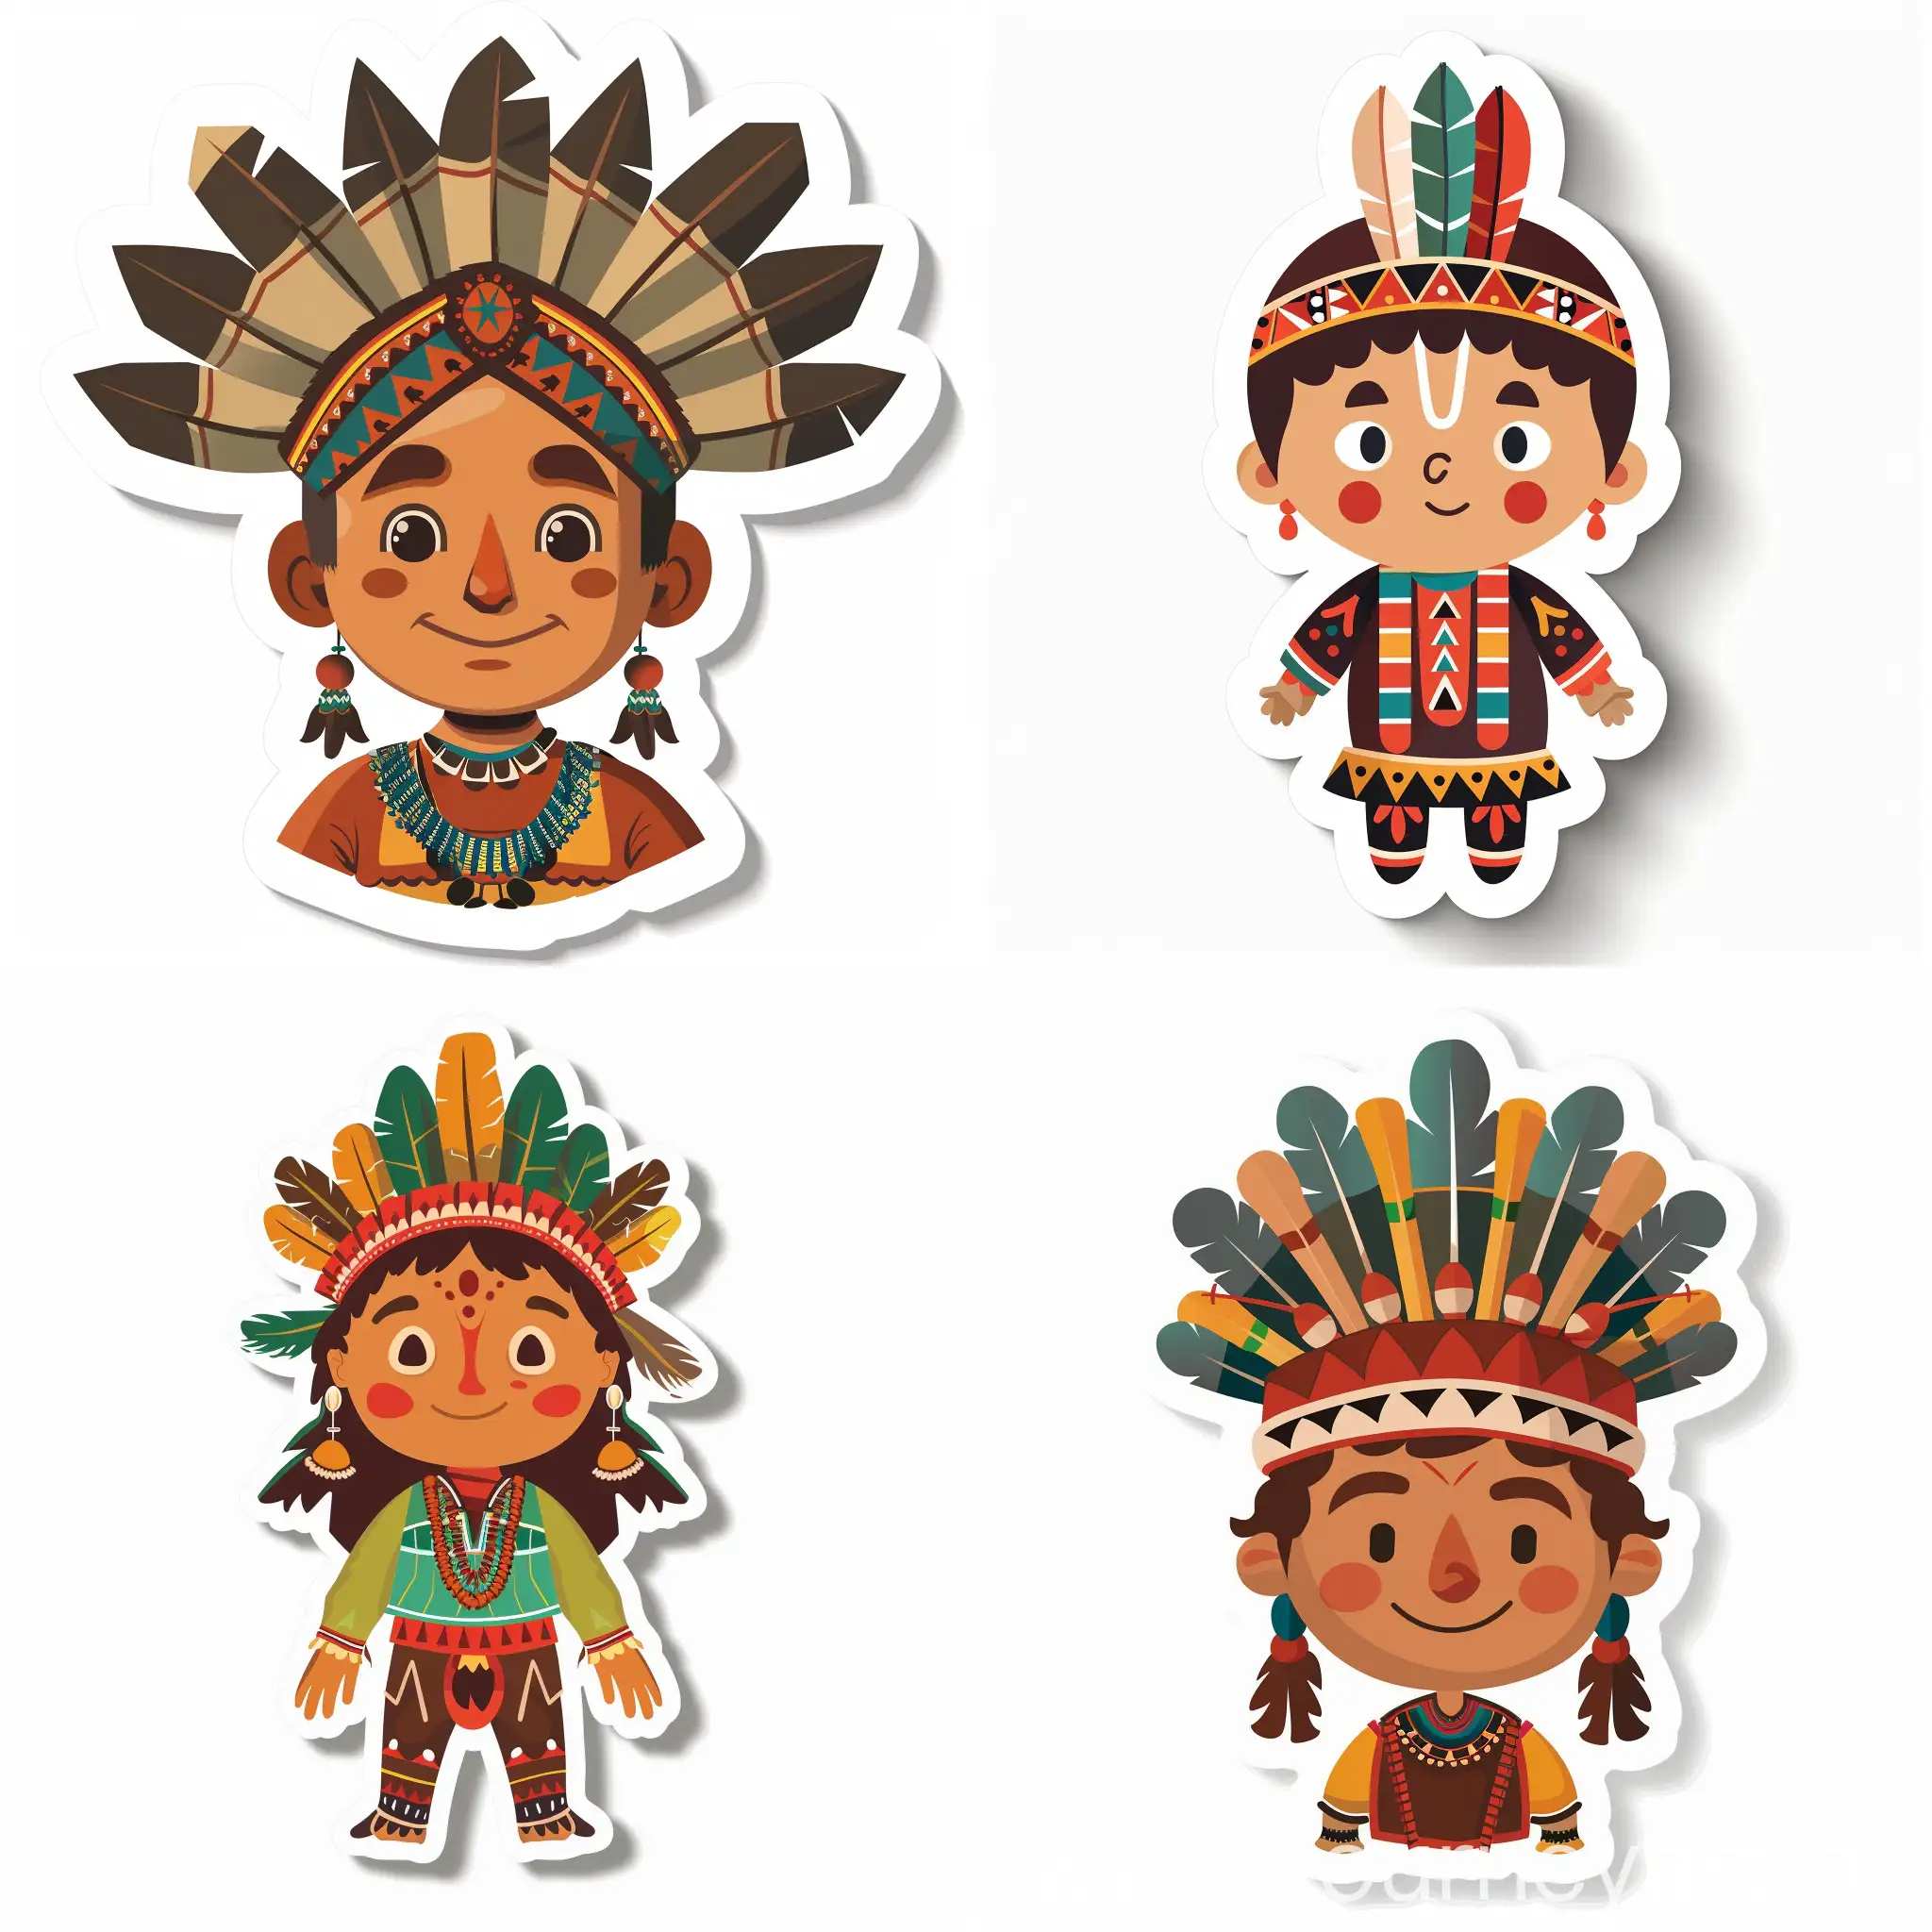 HighQuality-Flat-Style-Cartoon-Sticker-of-an-Indian-Character